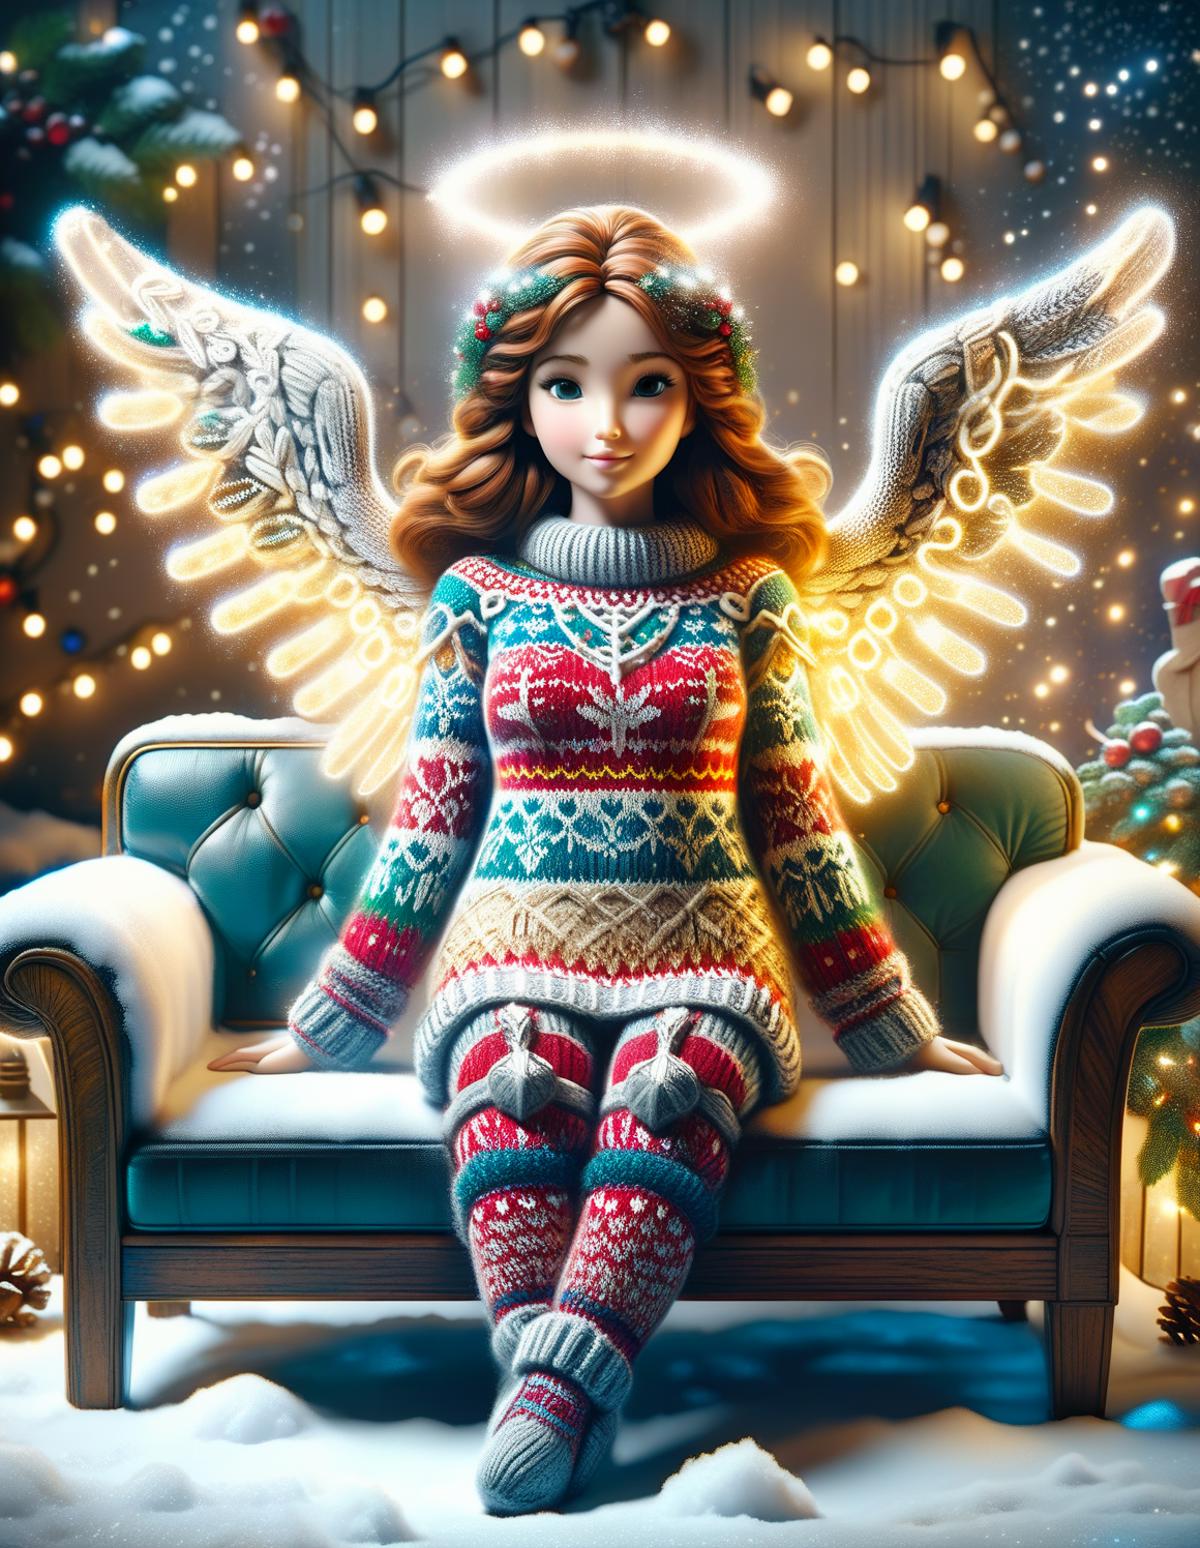 A Christmas Angel wearing a sweater and winged socks sitting on a chair.